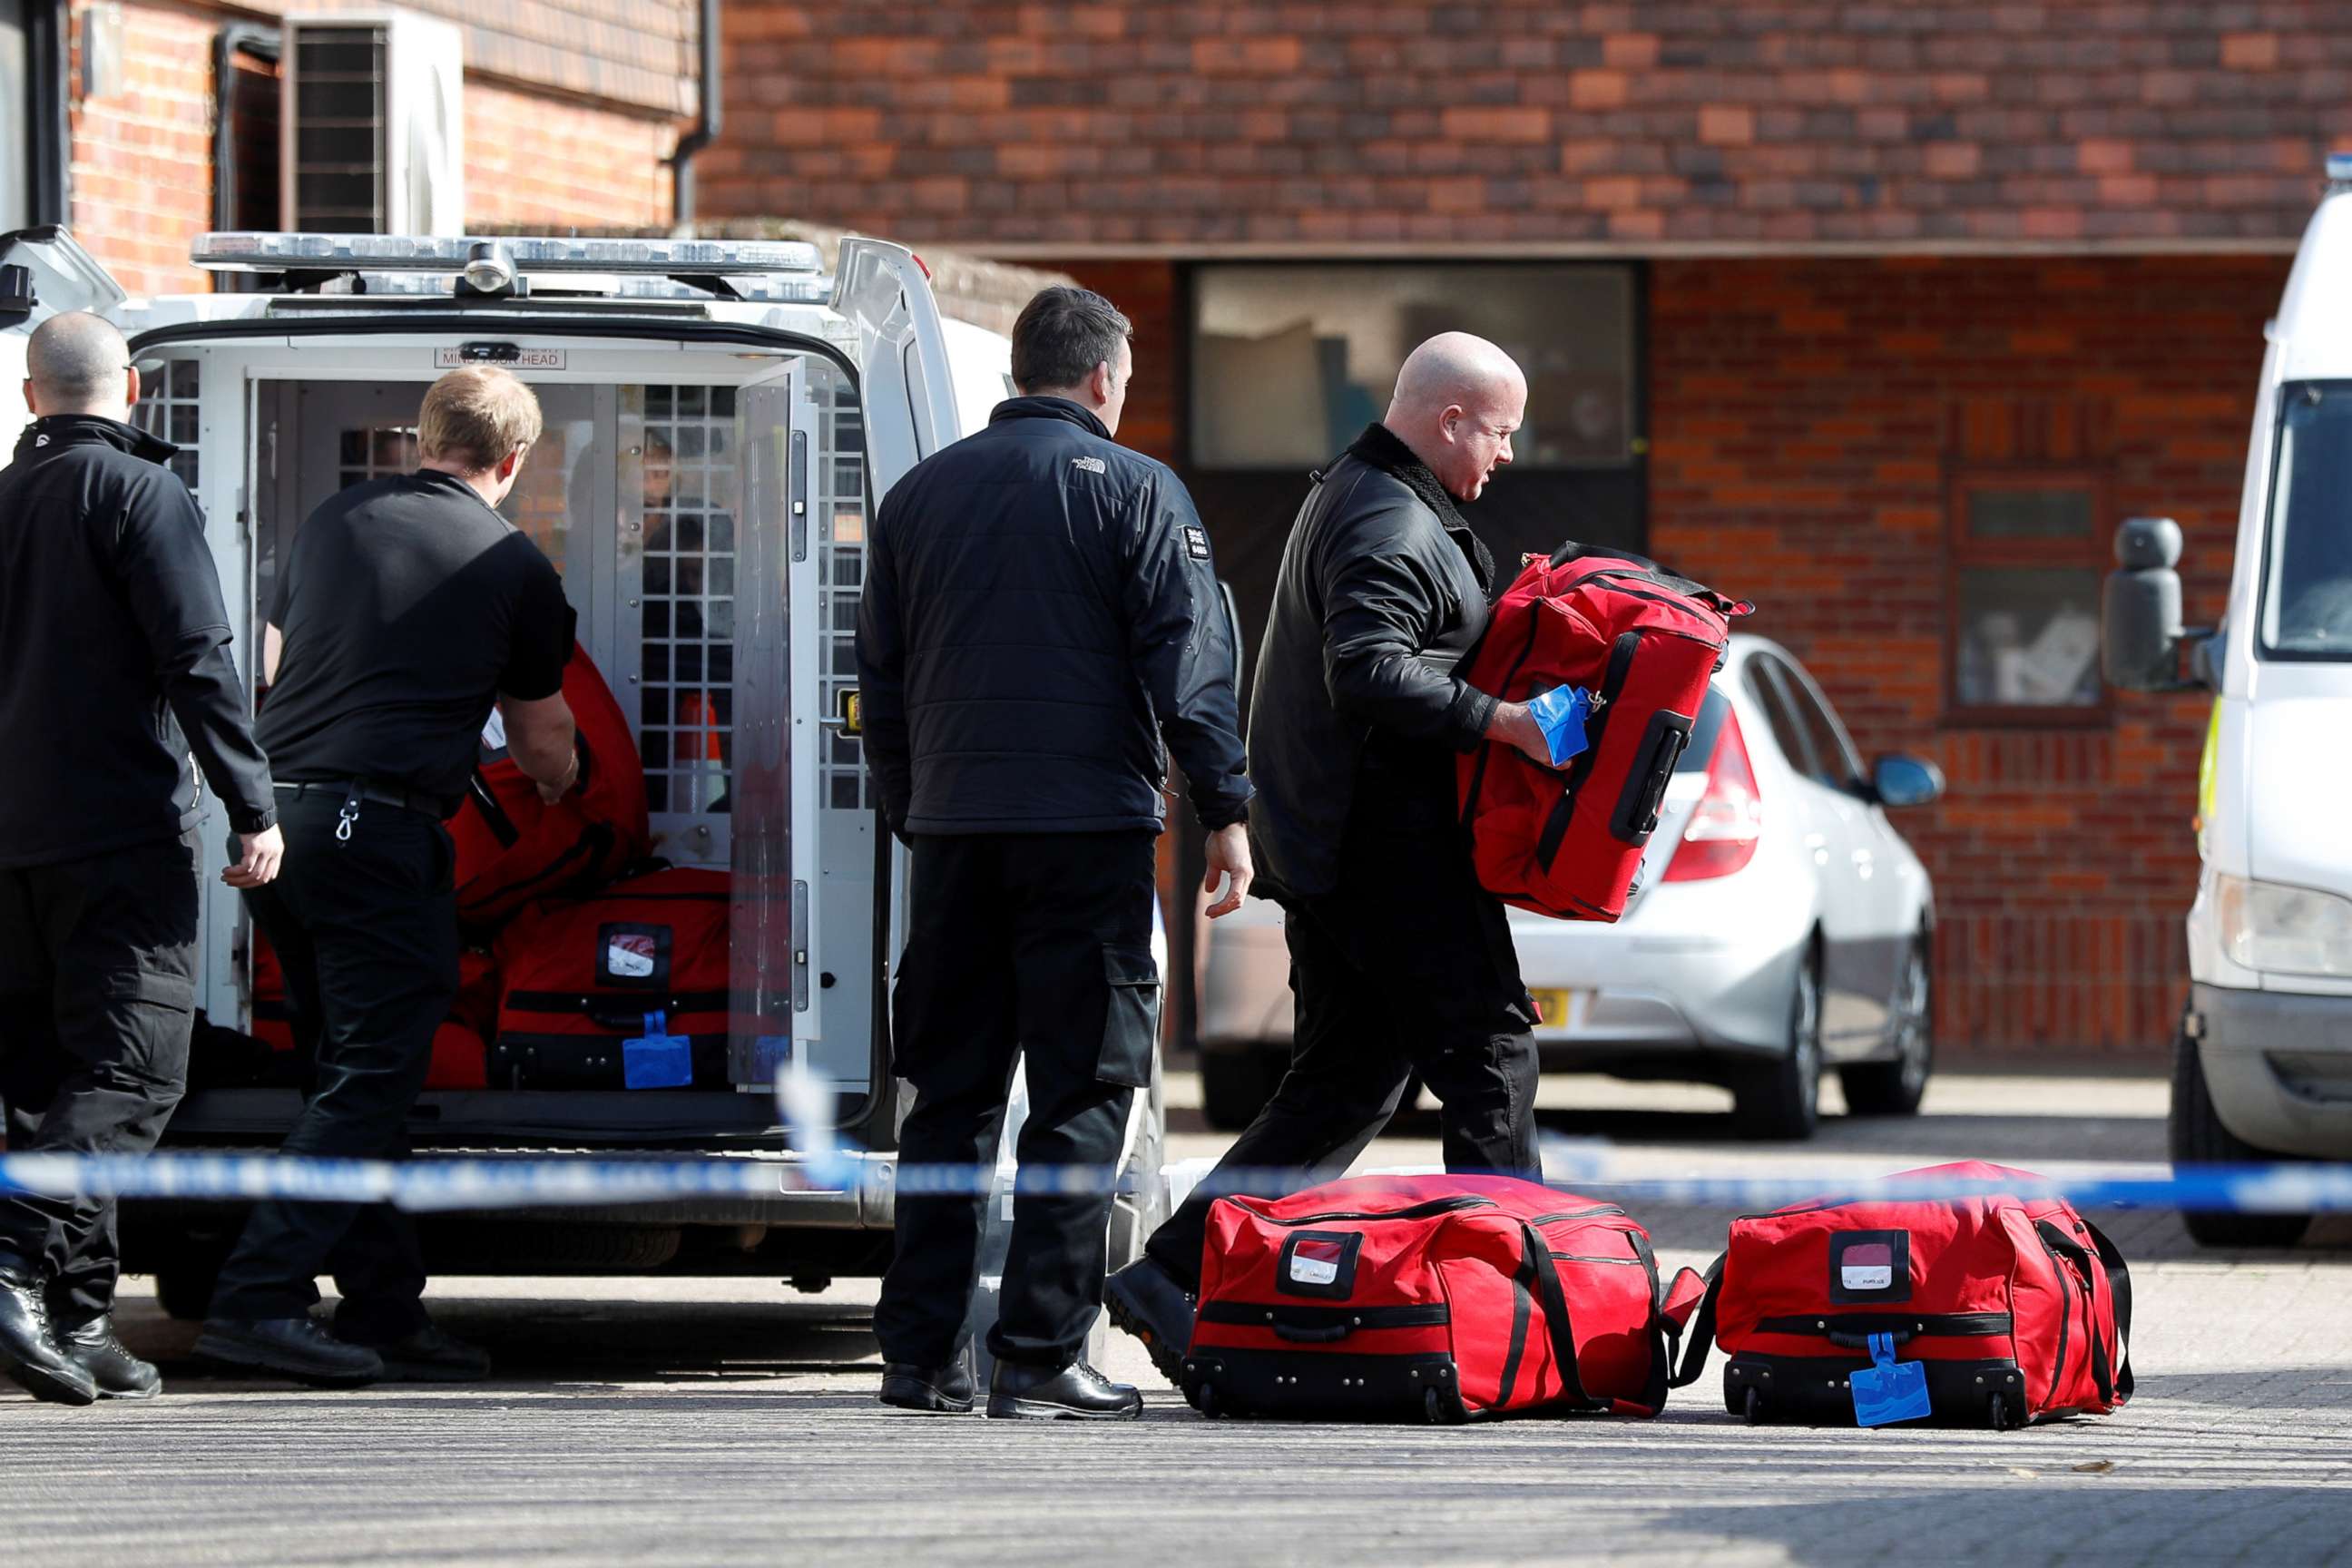 PHOTO: Inspectors from the Organisation for the Prohibition of Chemical Weapons arrive to begin work at the scene of the nerve agent attack on former Russian agent Sergei Skripal, in Salisbury, Britain March 21, 2018.